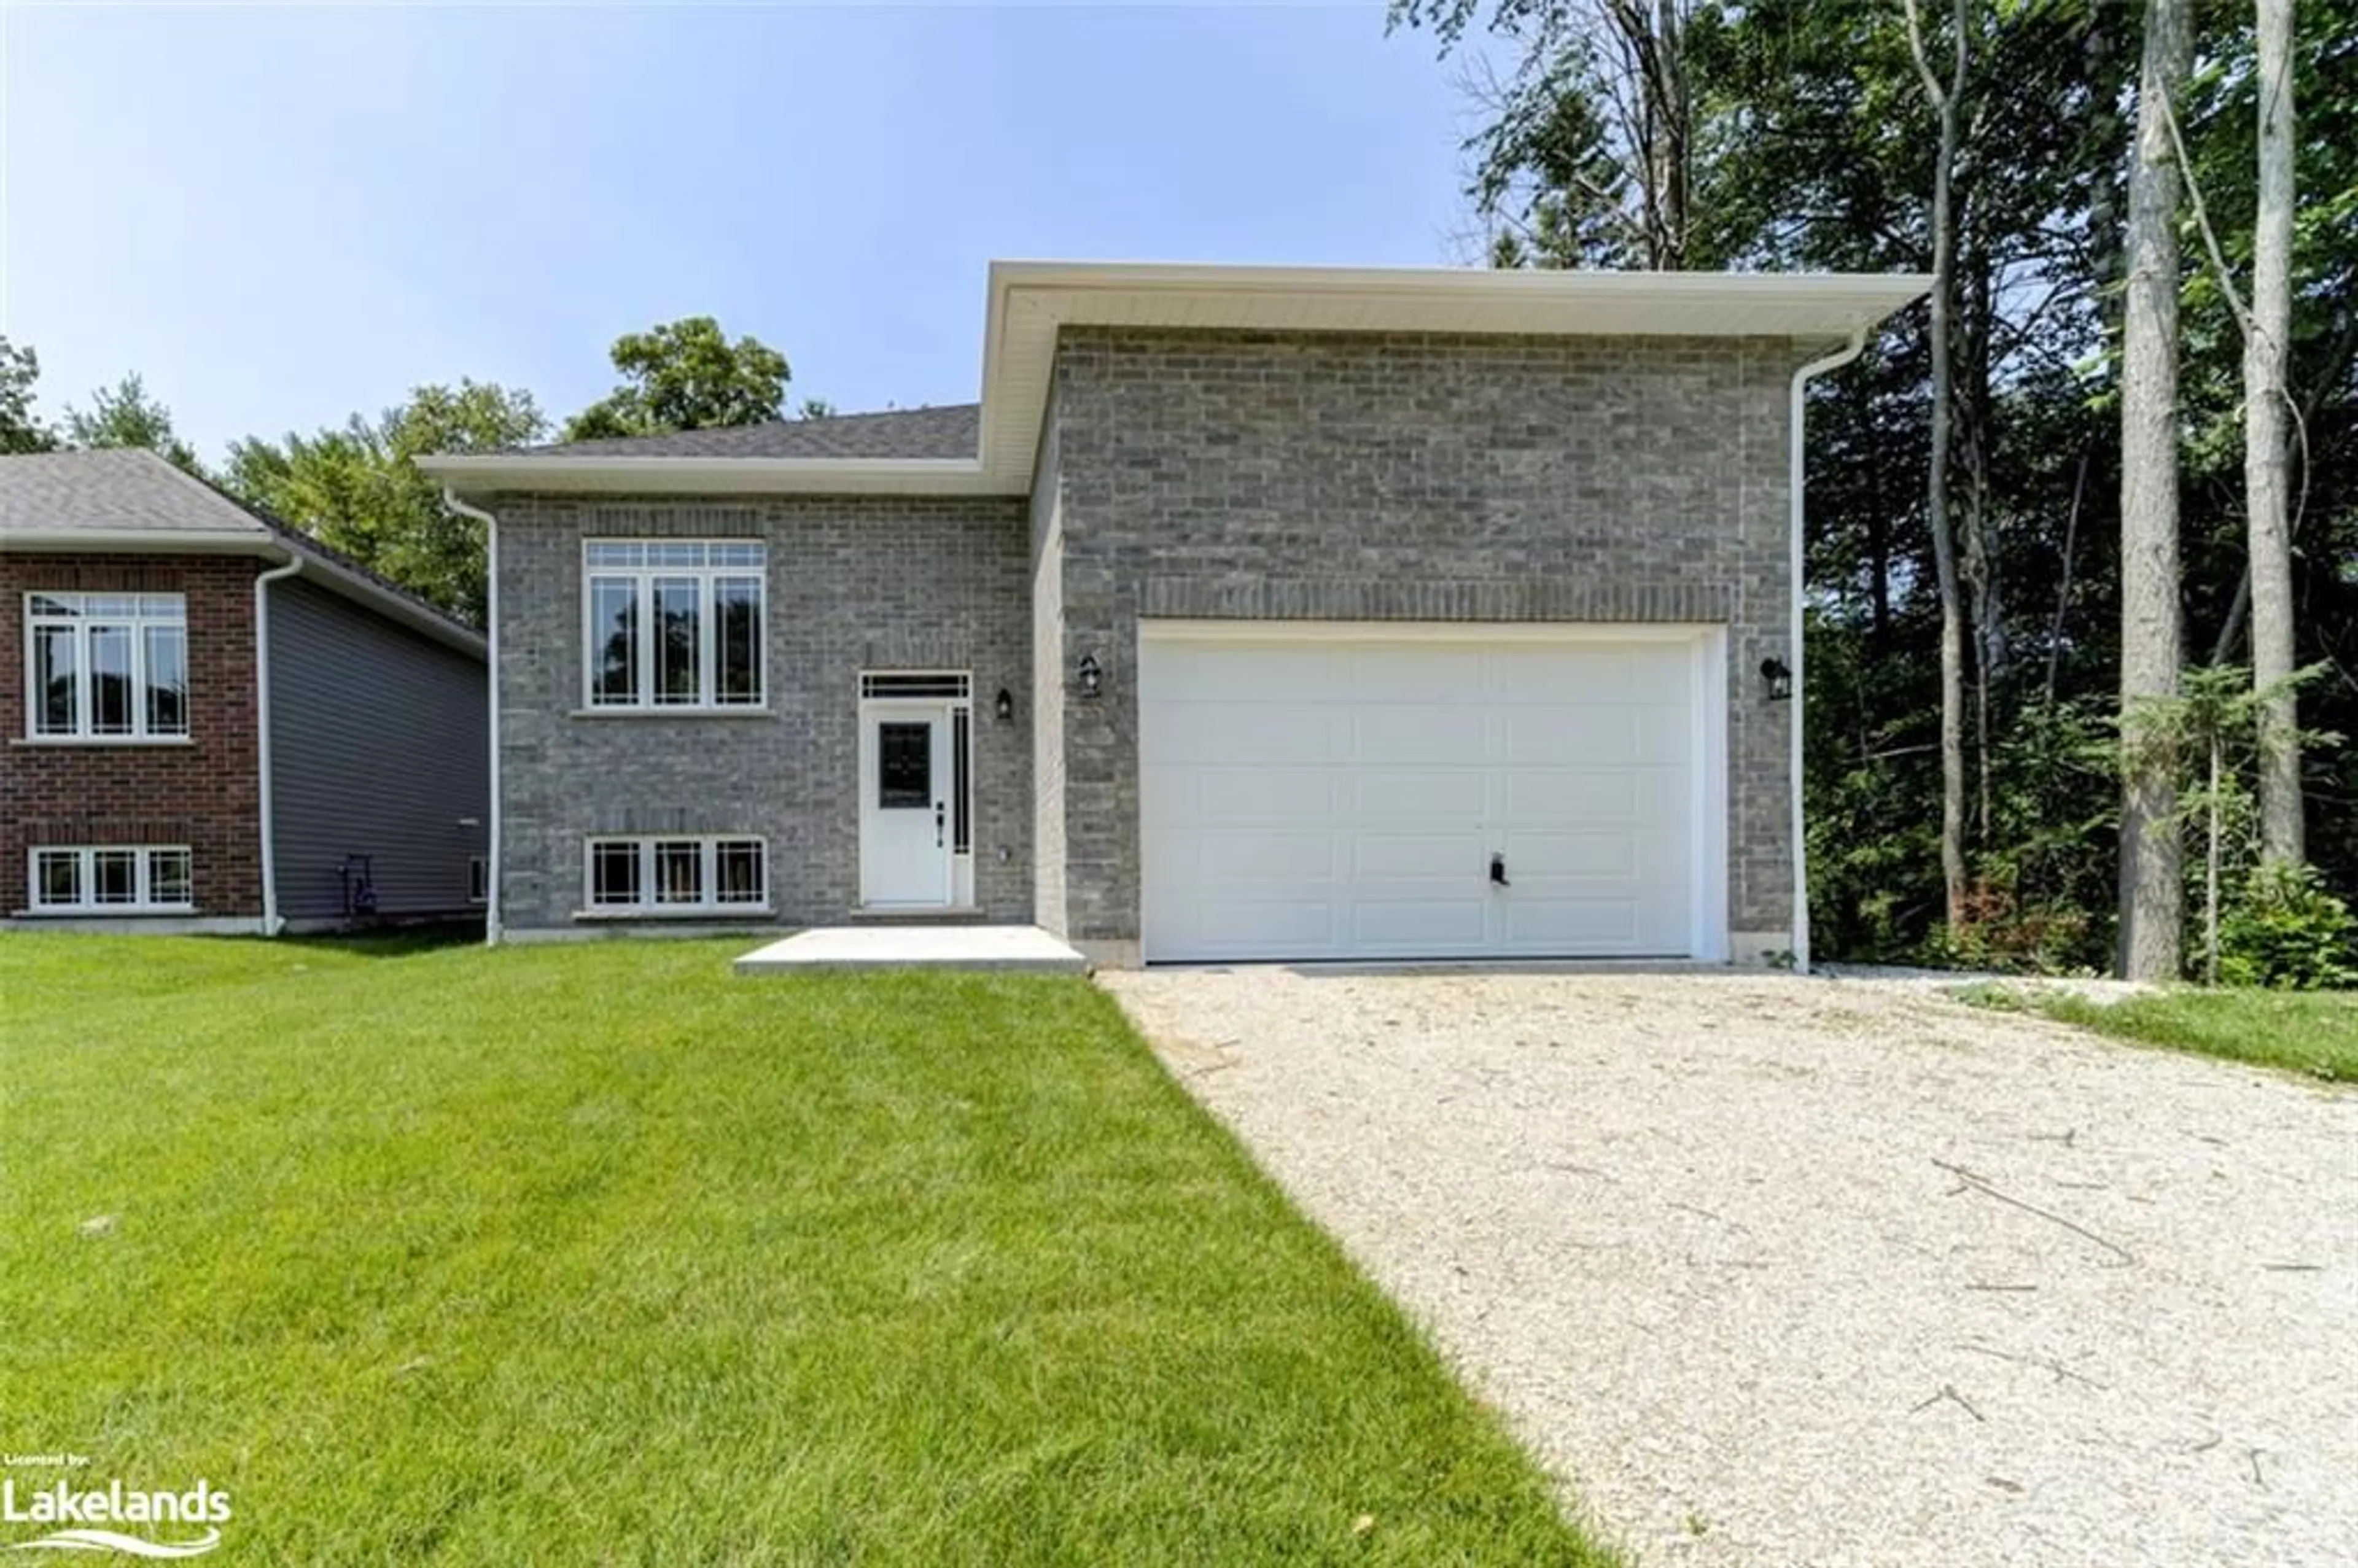 Home with brick exterior material for 12 56th St, Wasaga Beach Ontario L9Z 1W5